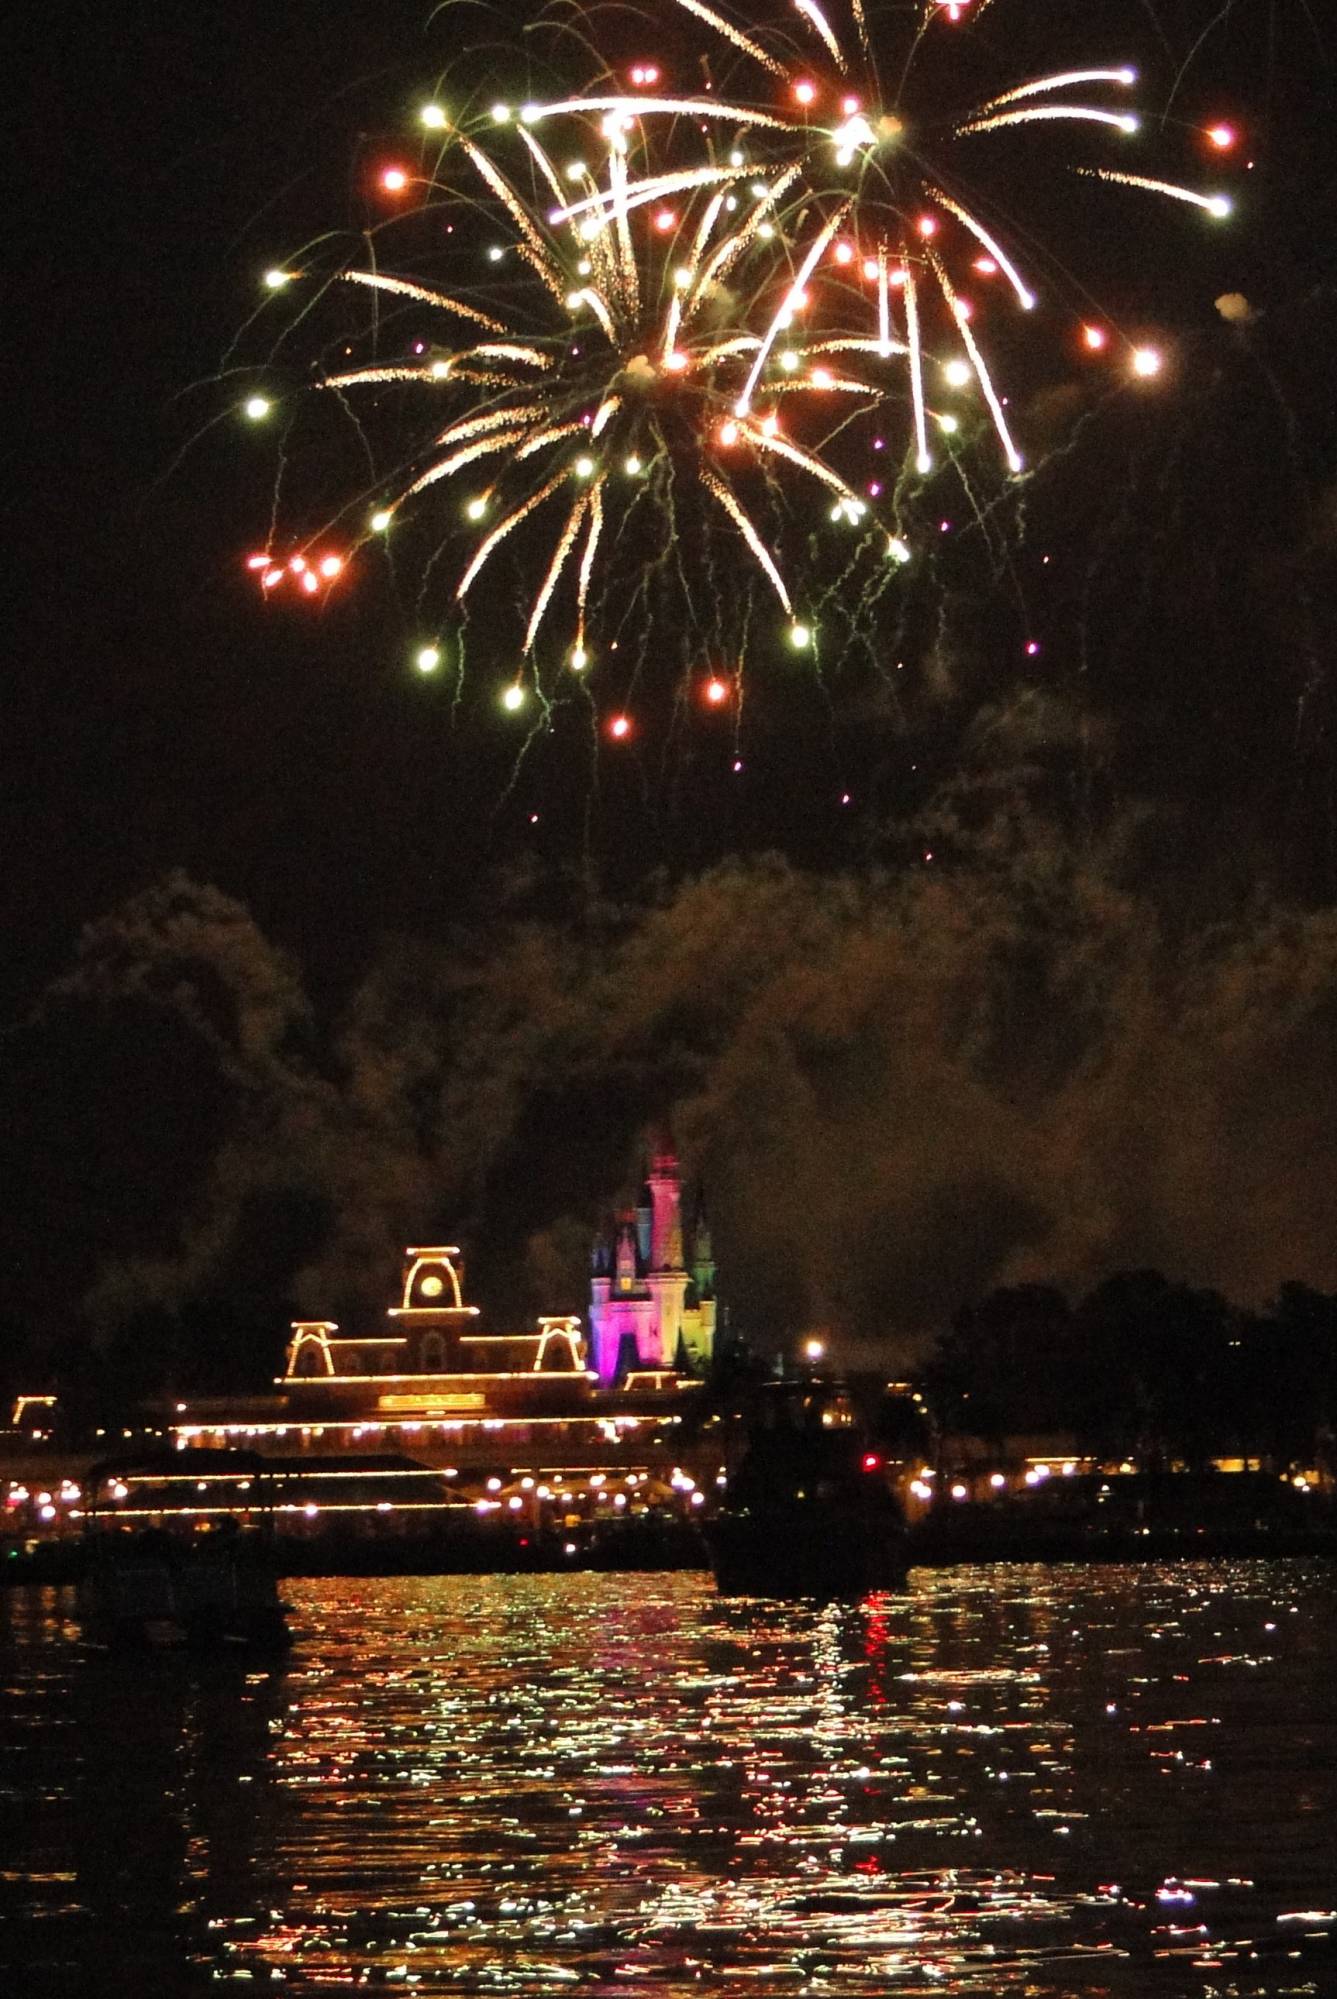 Set sail with the Pirates on the Pirates and Pals Fireworks Cruise |PassPorter.com